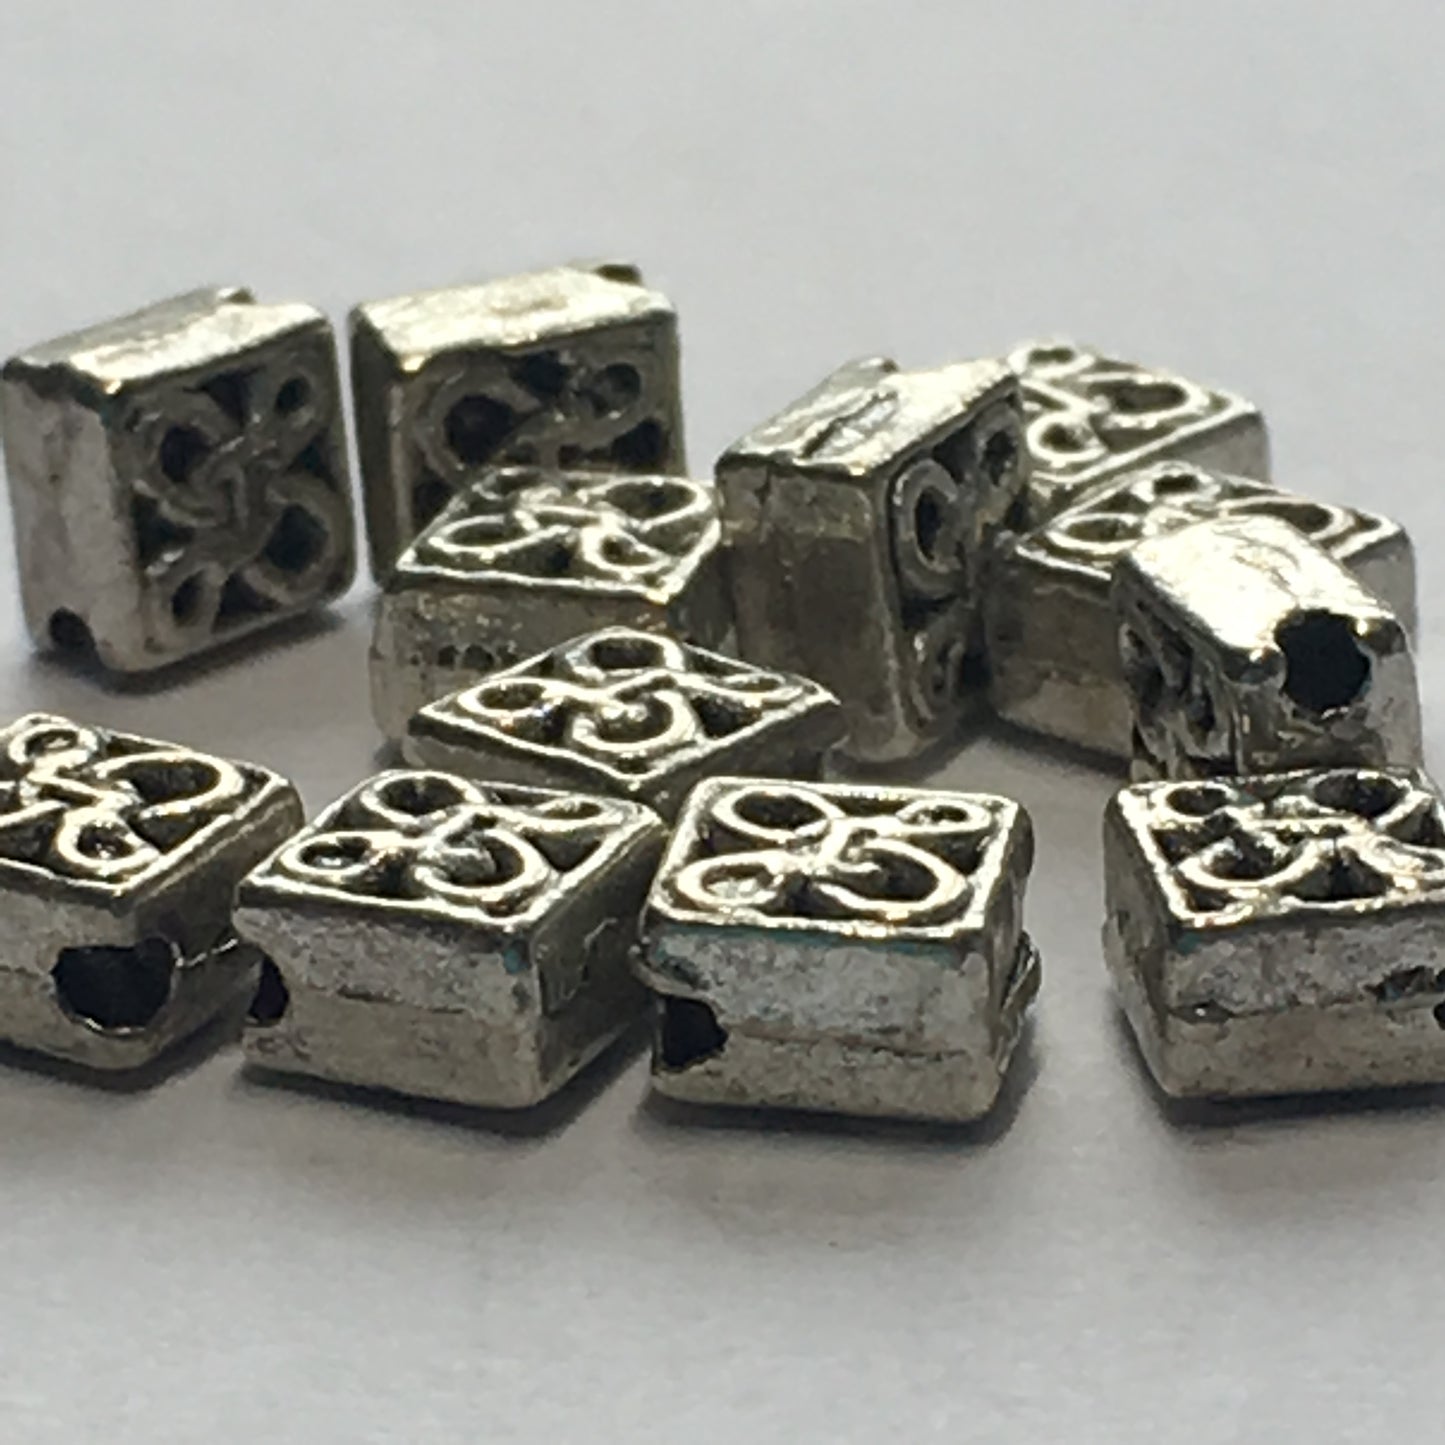 Antique Silver Celtic Diamond Beads, Hole on Point,  6 mm - 14 Beads